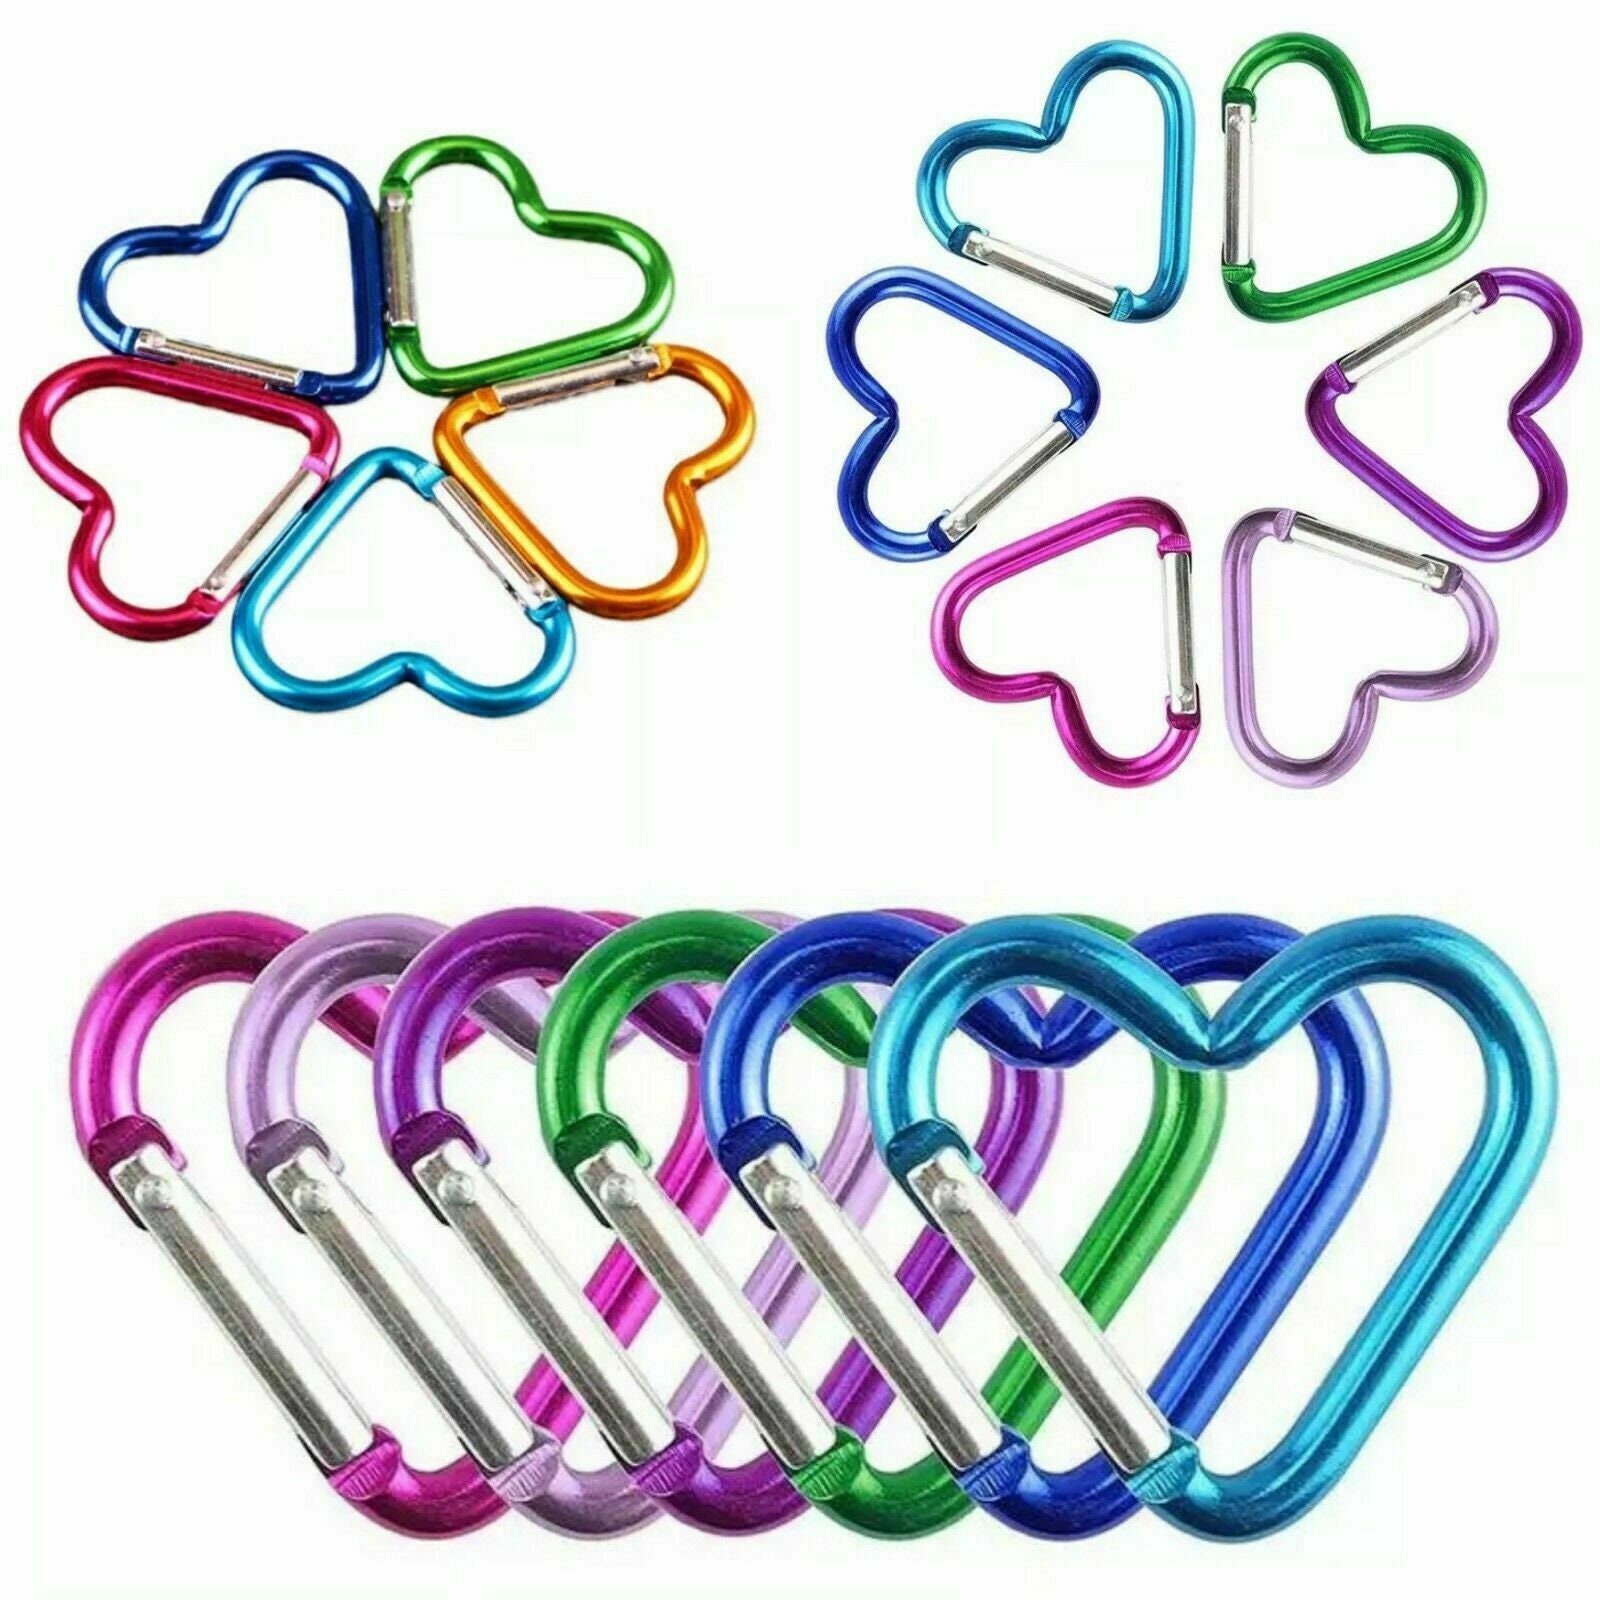 Carabiner Ocean Plastics Recycled Sustainable Gift Ideas 